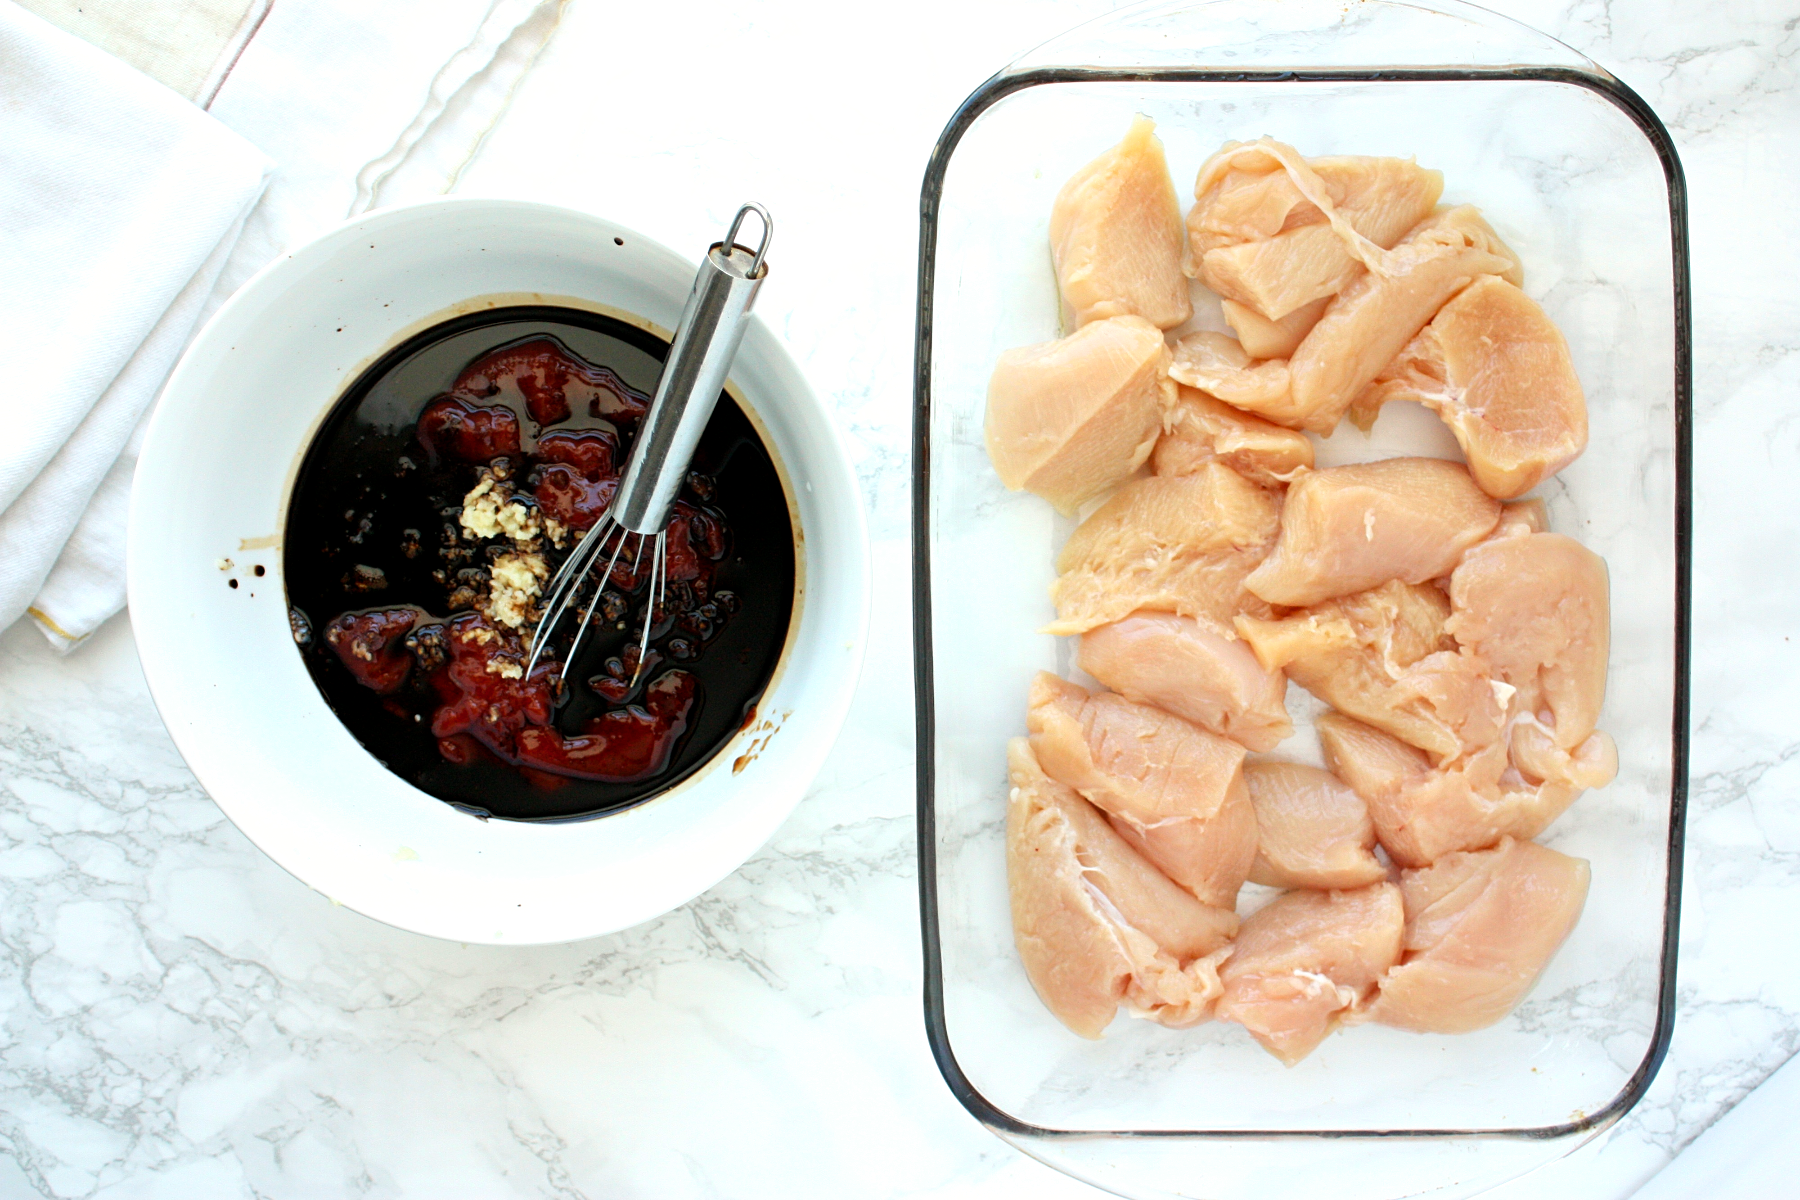 Oven Baked Sweet and Sour Chicken